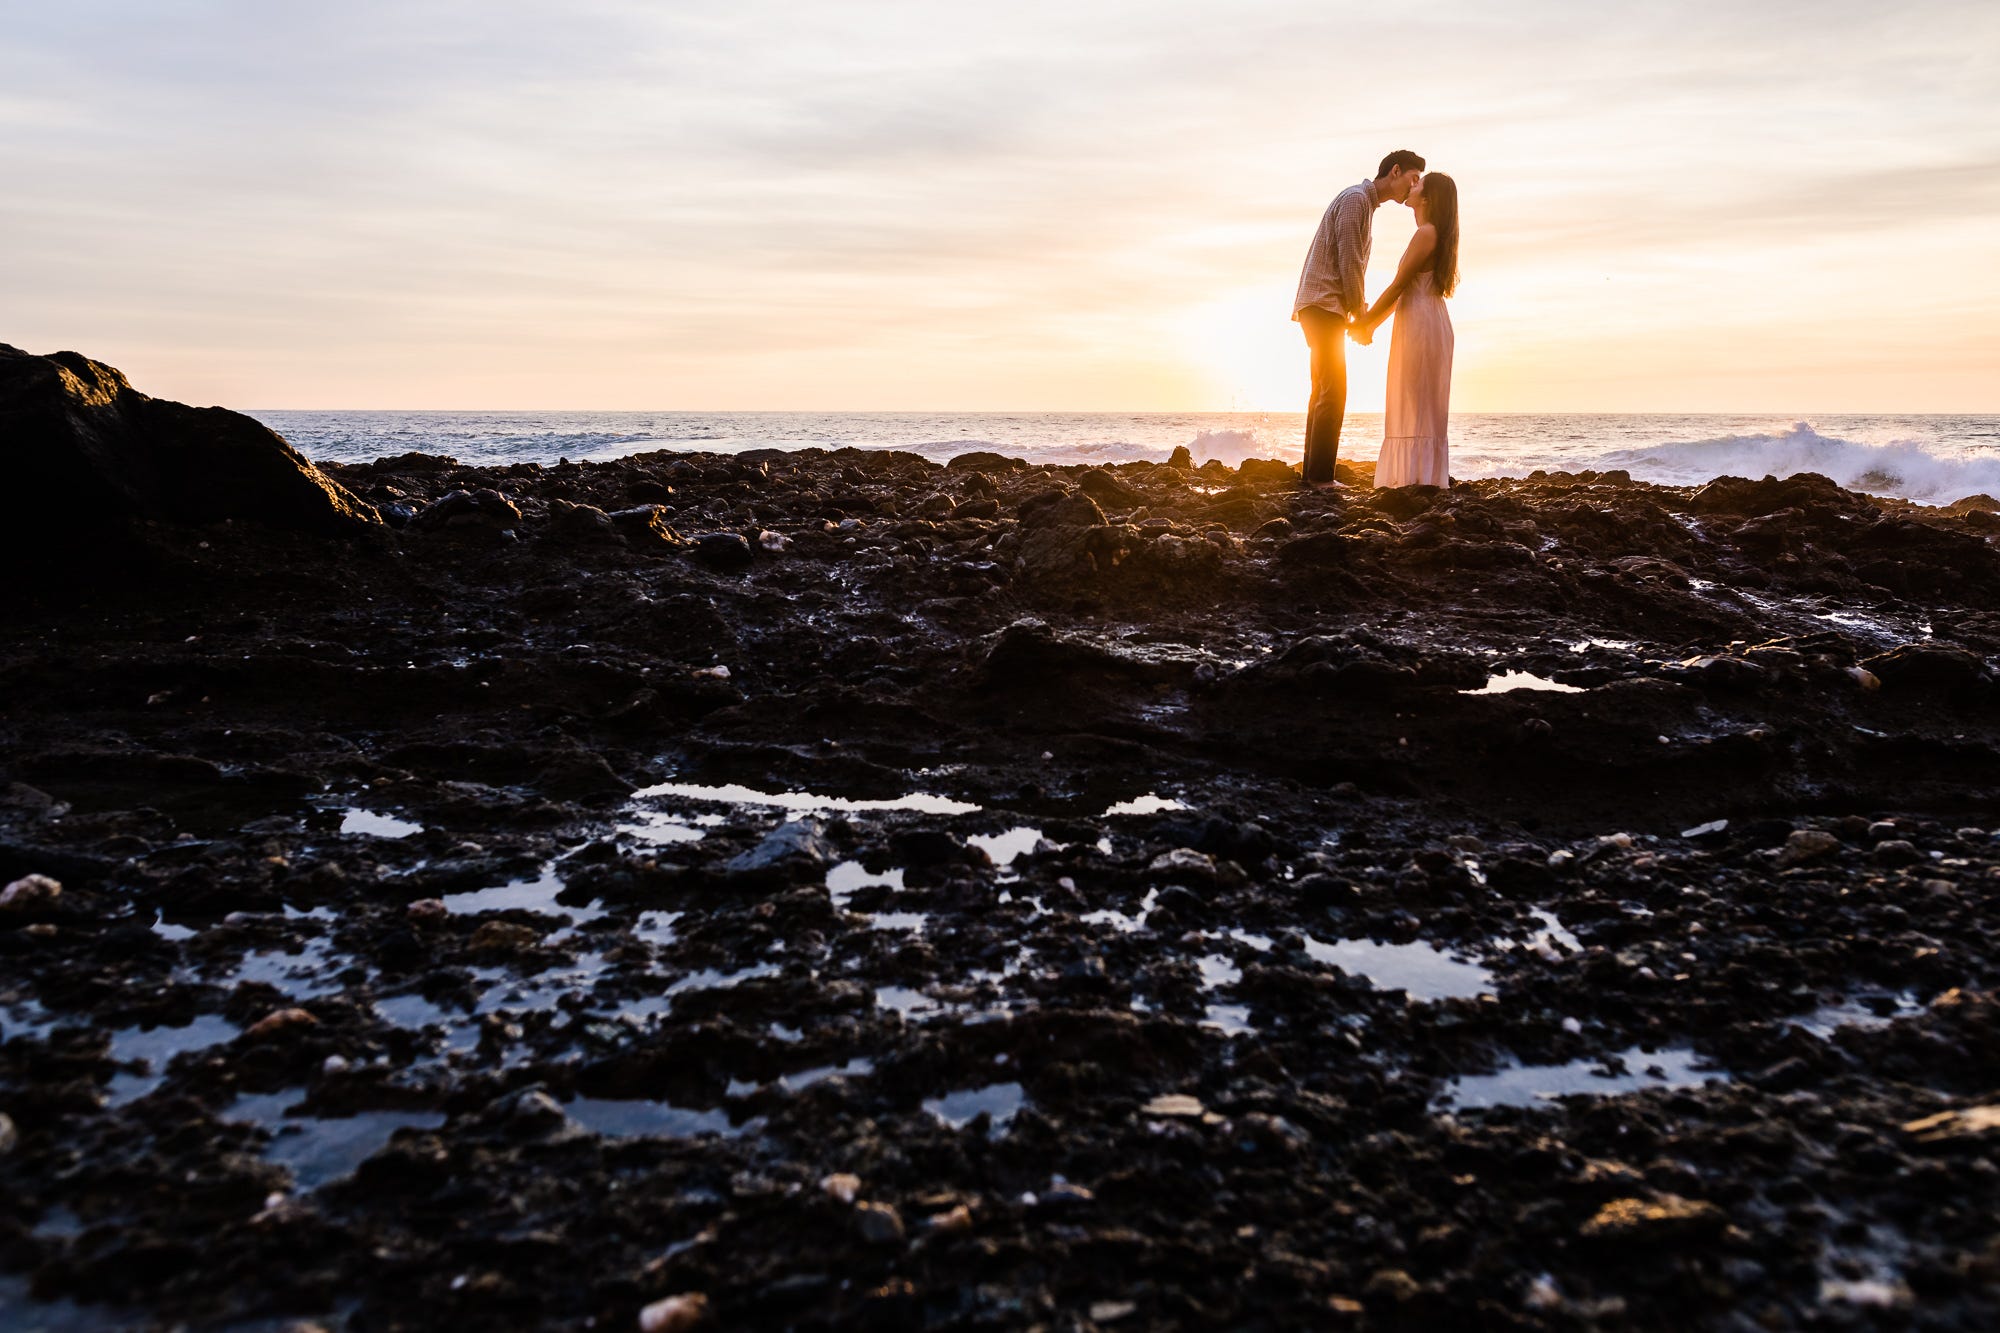 Take Your In-Person Wedding Photography Marketing to the Next Level with  the New Features from Fundy Designer